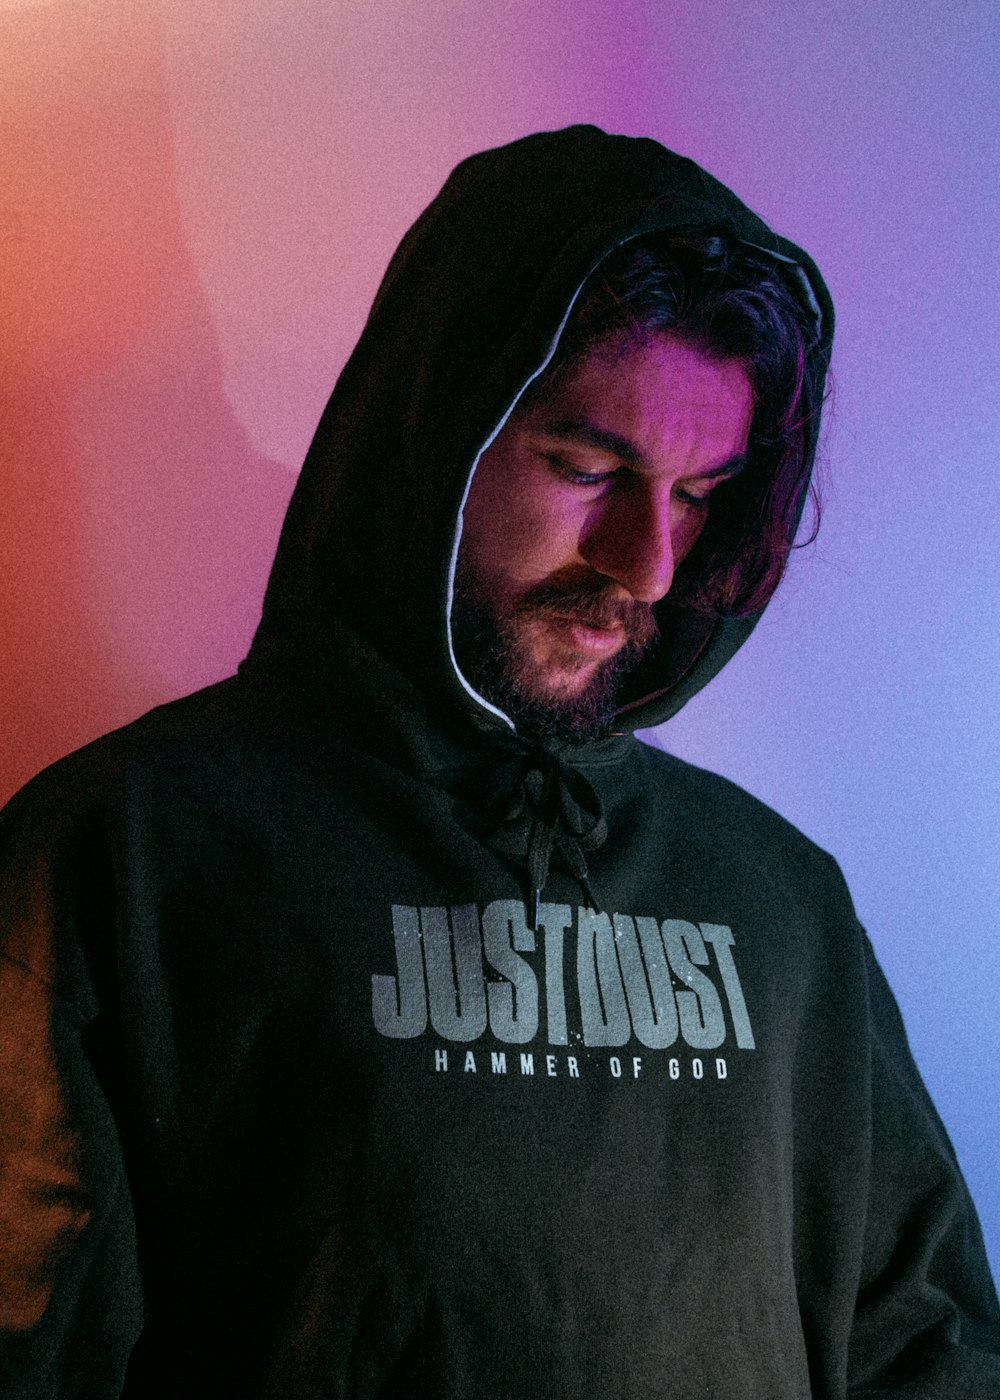 a man wearing a black hoodie with the word justhust on it